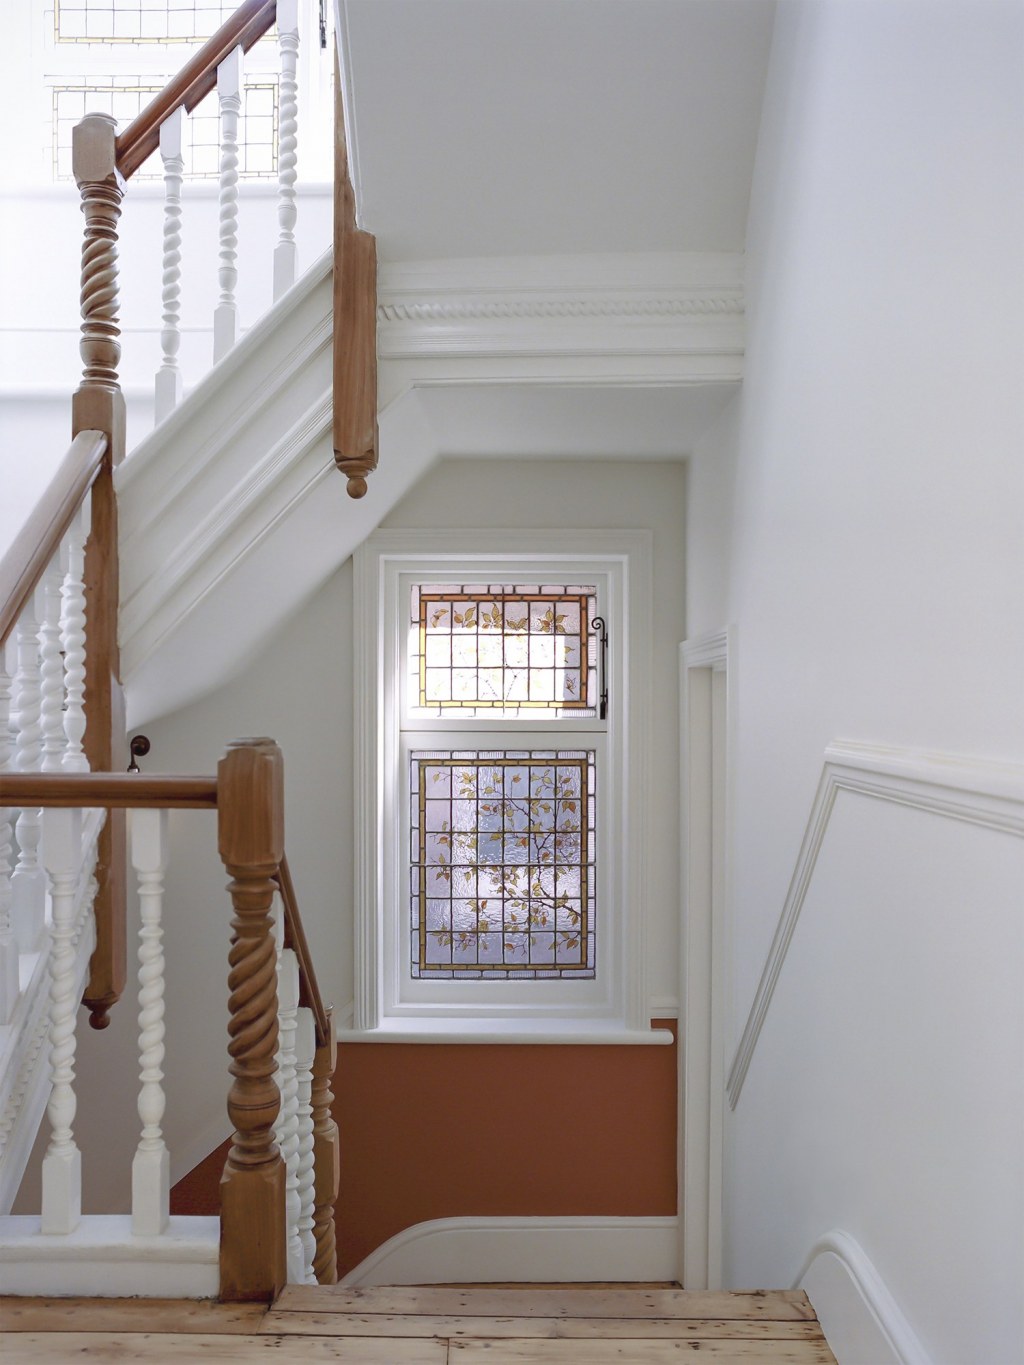 Muswell Hill / Stair - image credit Mary Gaudin, photographer